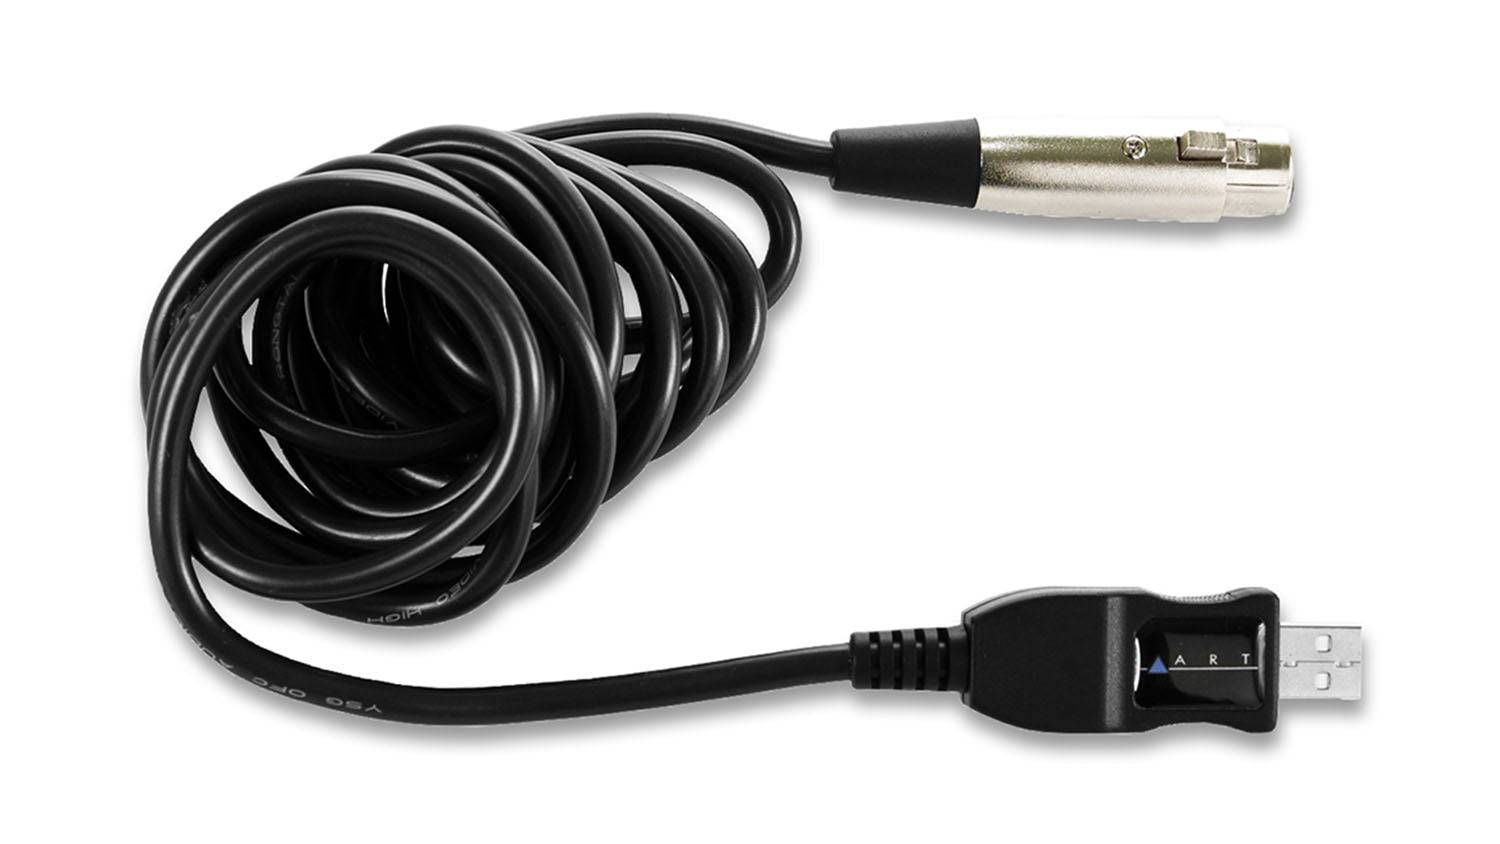 ART XConnect USB to Microphone Cable - Hollywood DJ